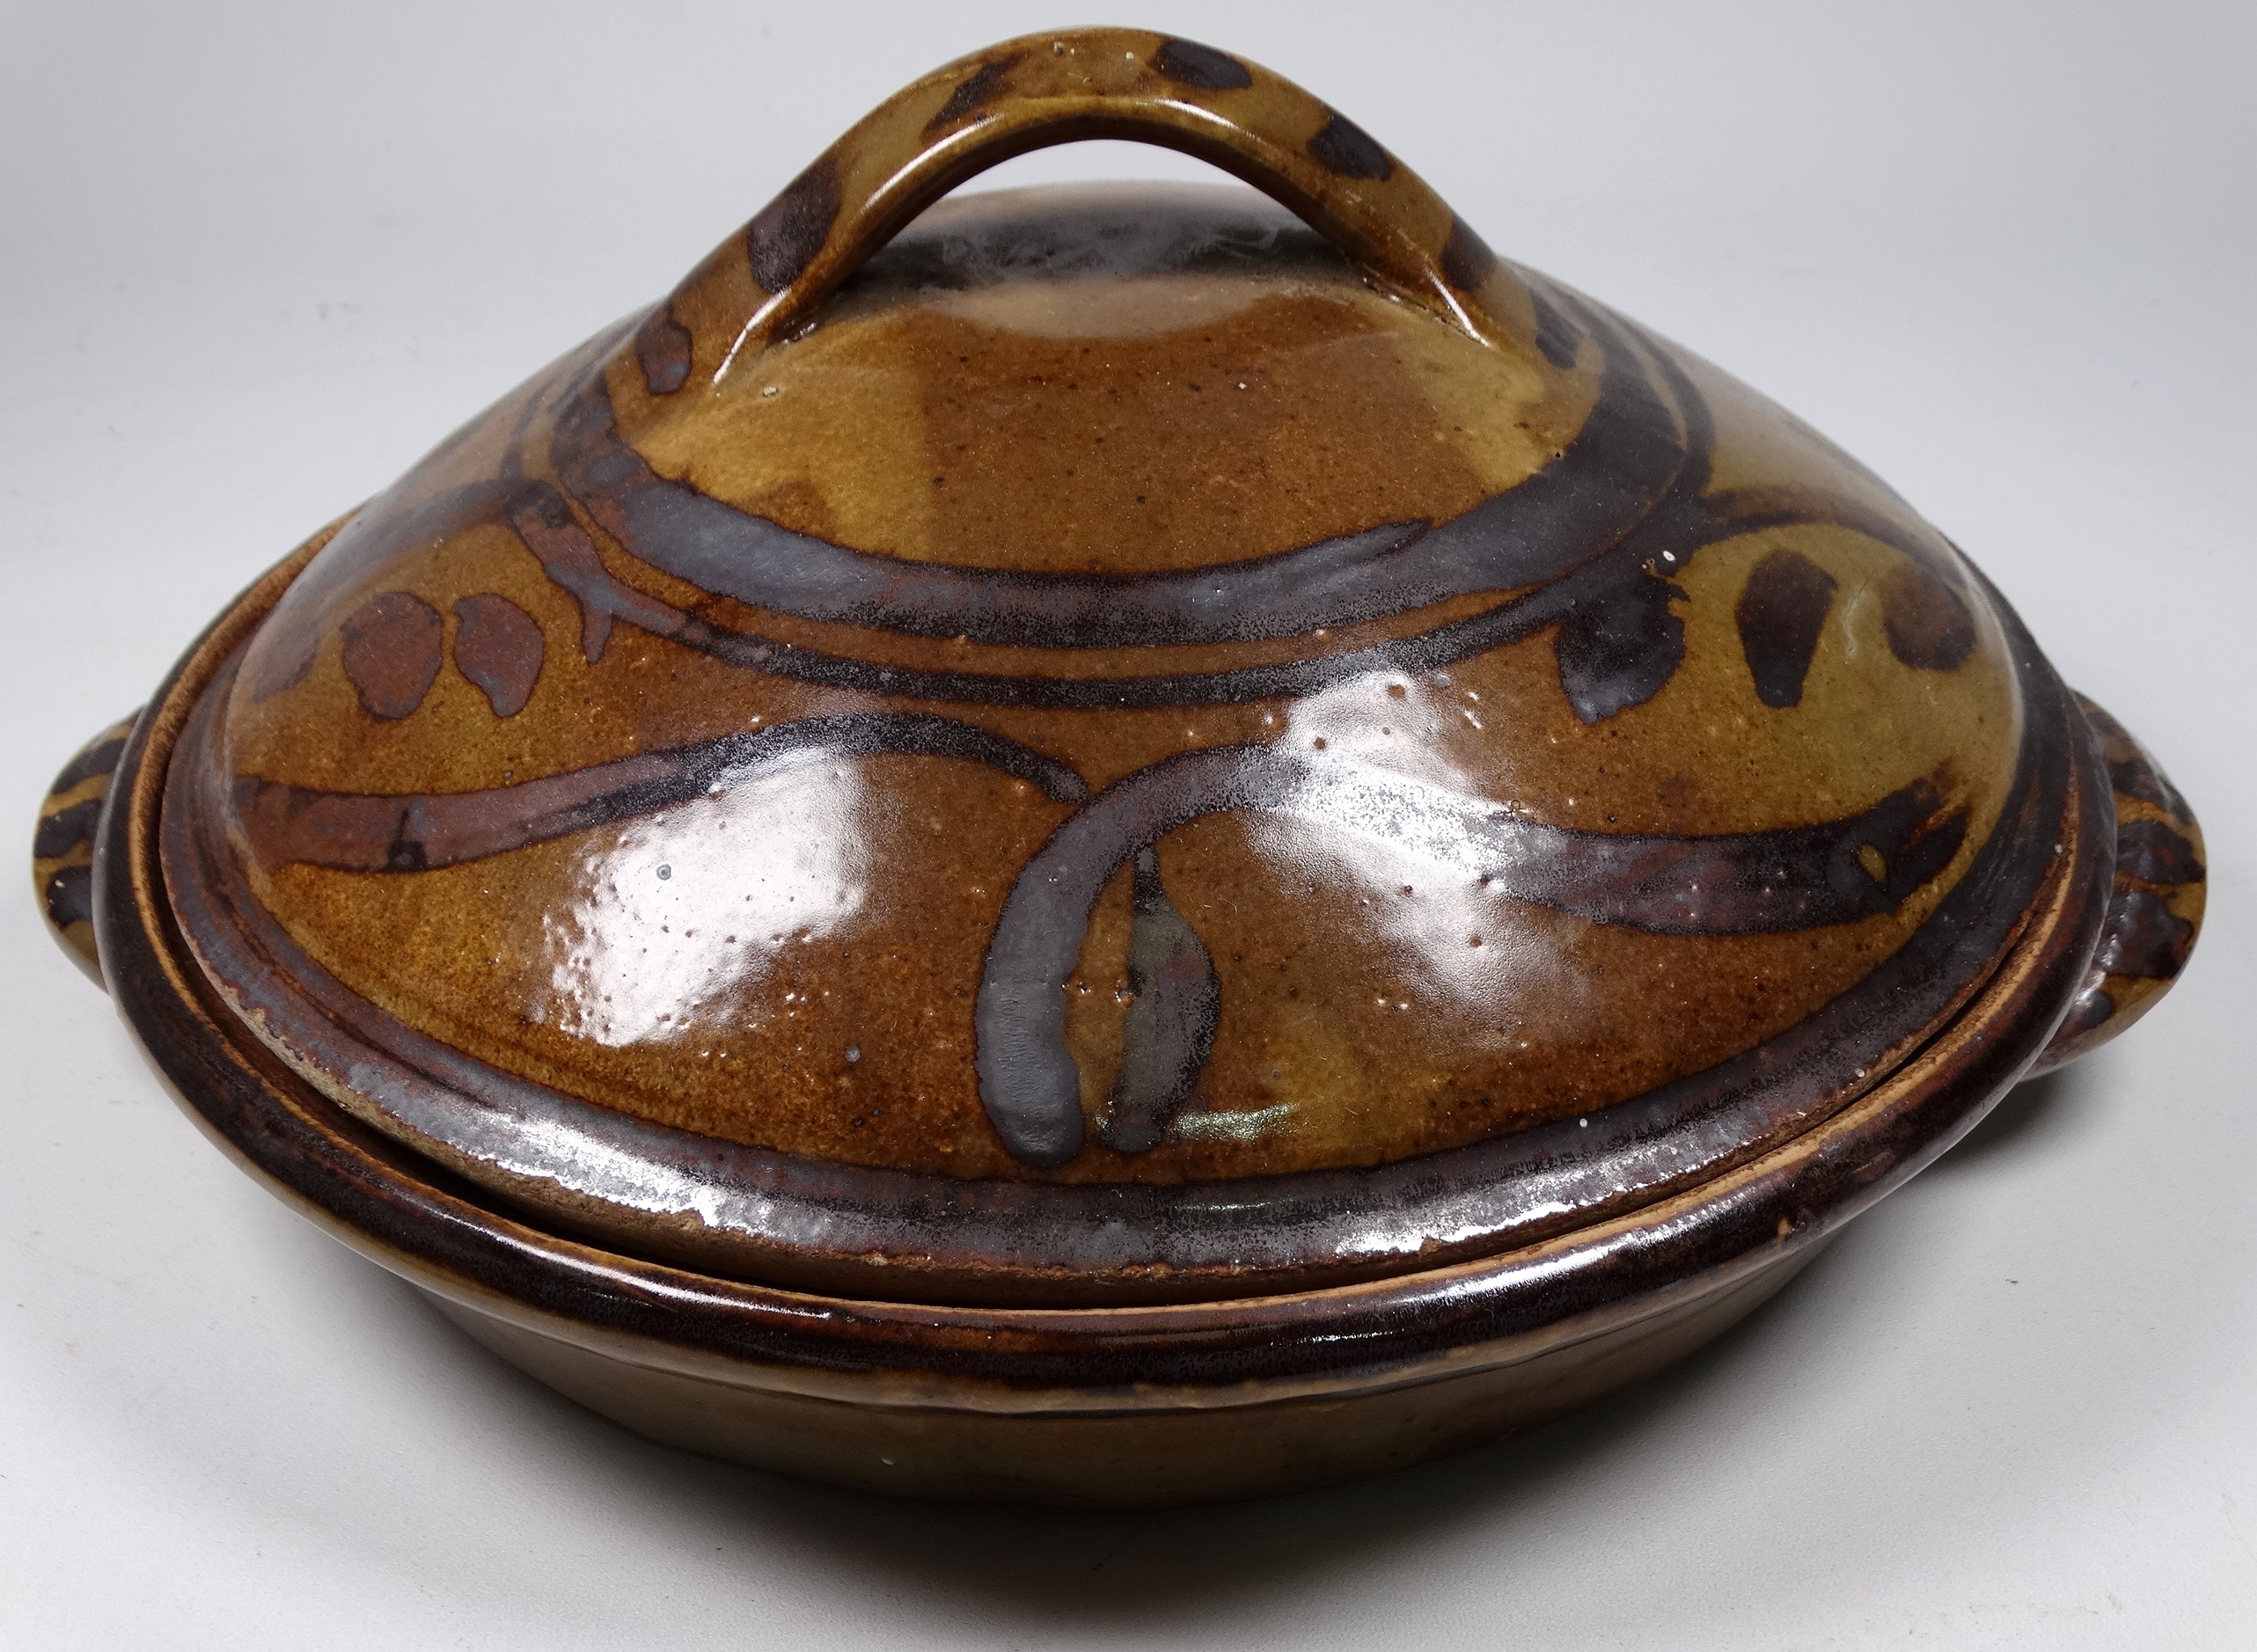 A Seth Cardew casserole dish and cover - impressed with Seth Cardew and Bridge Pottery marks, - Image 3 of 5